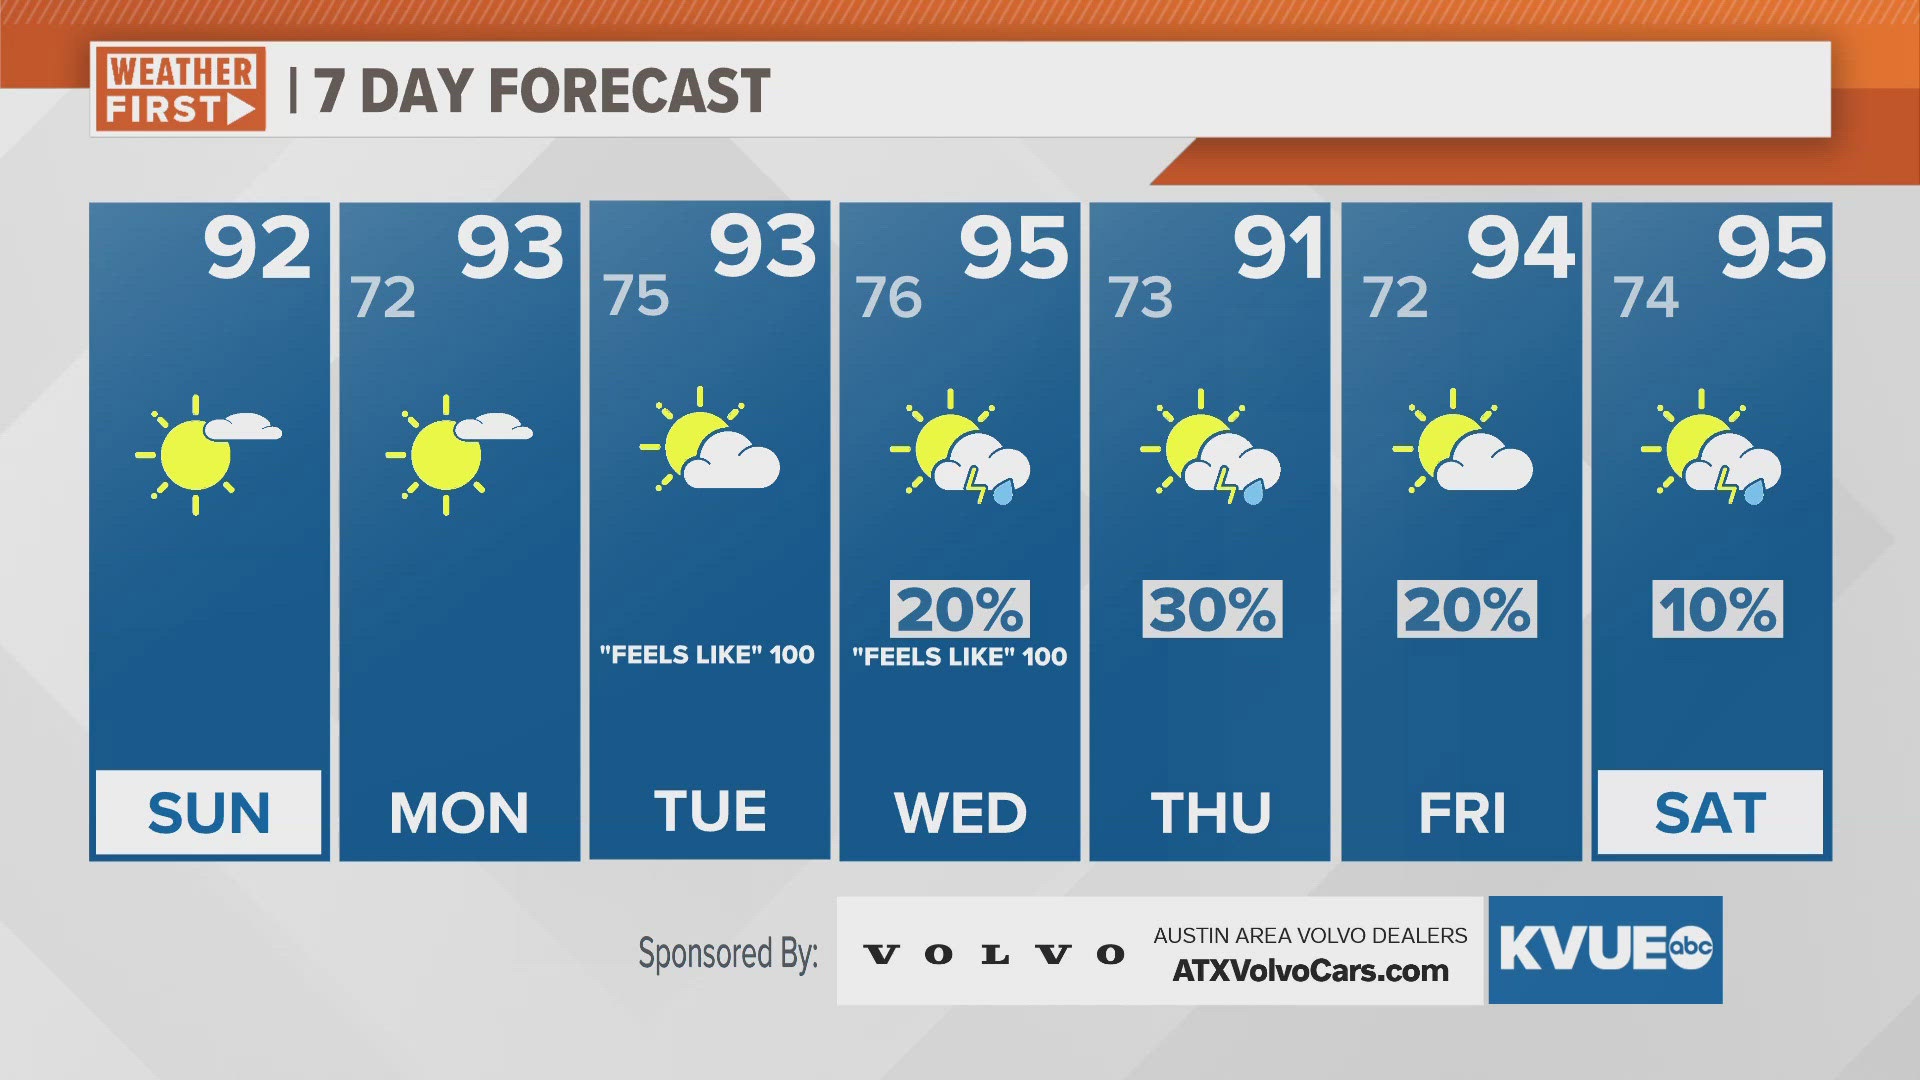 Humidity returns this week, accompanied with isolated rain chances and heat.